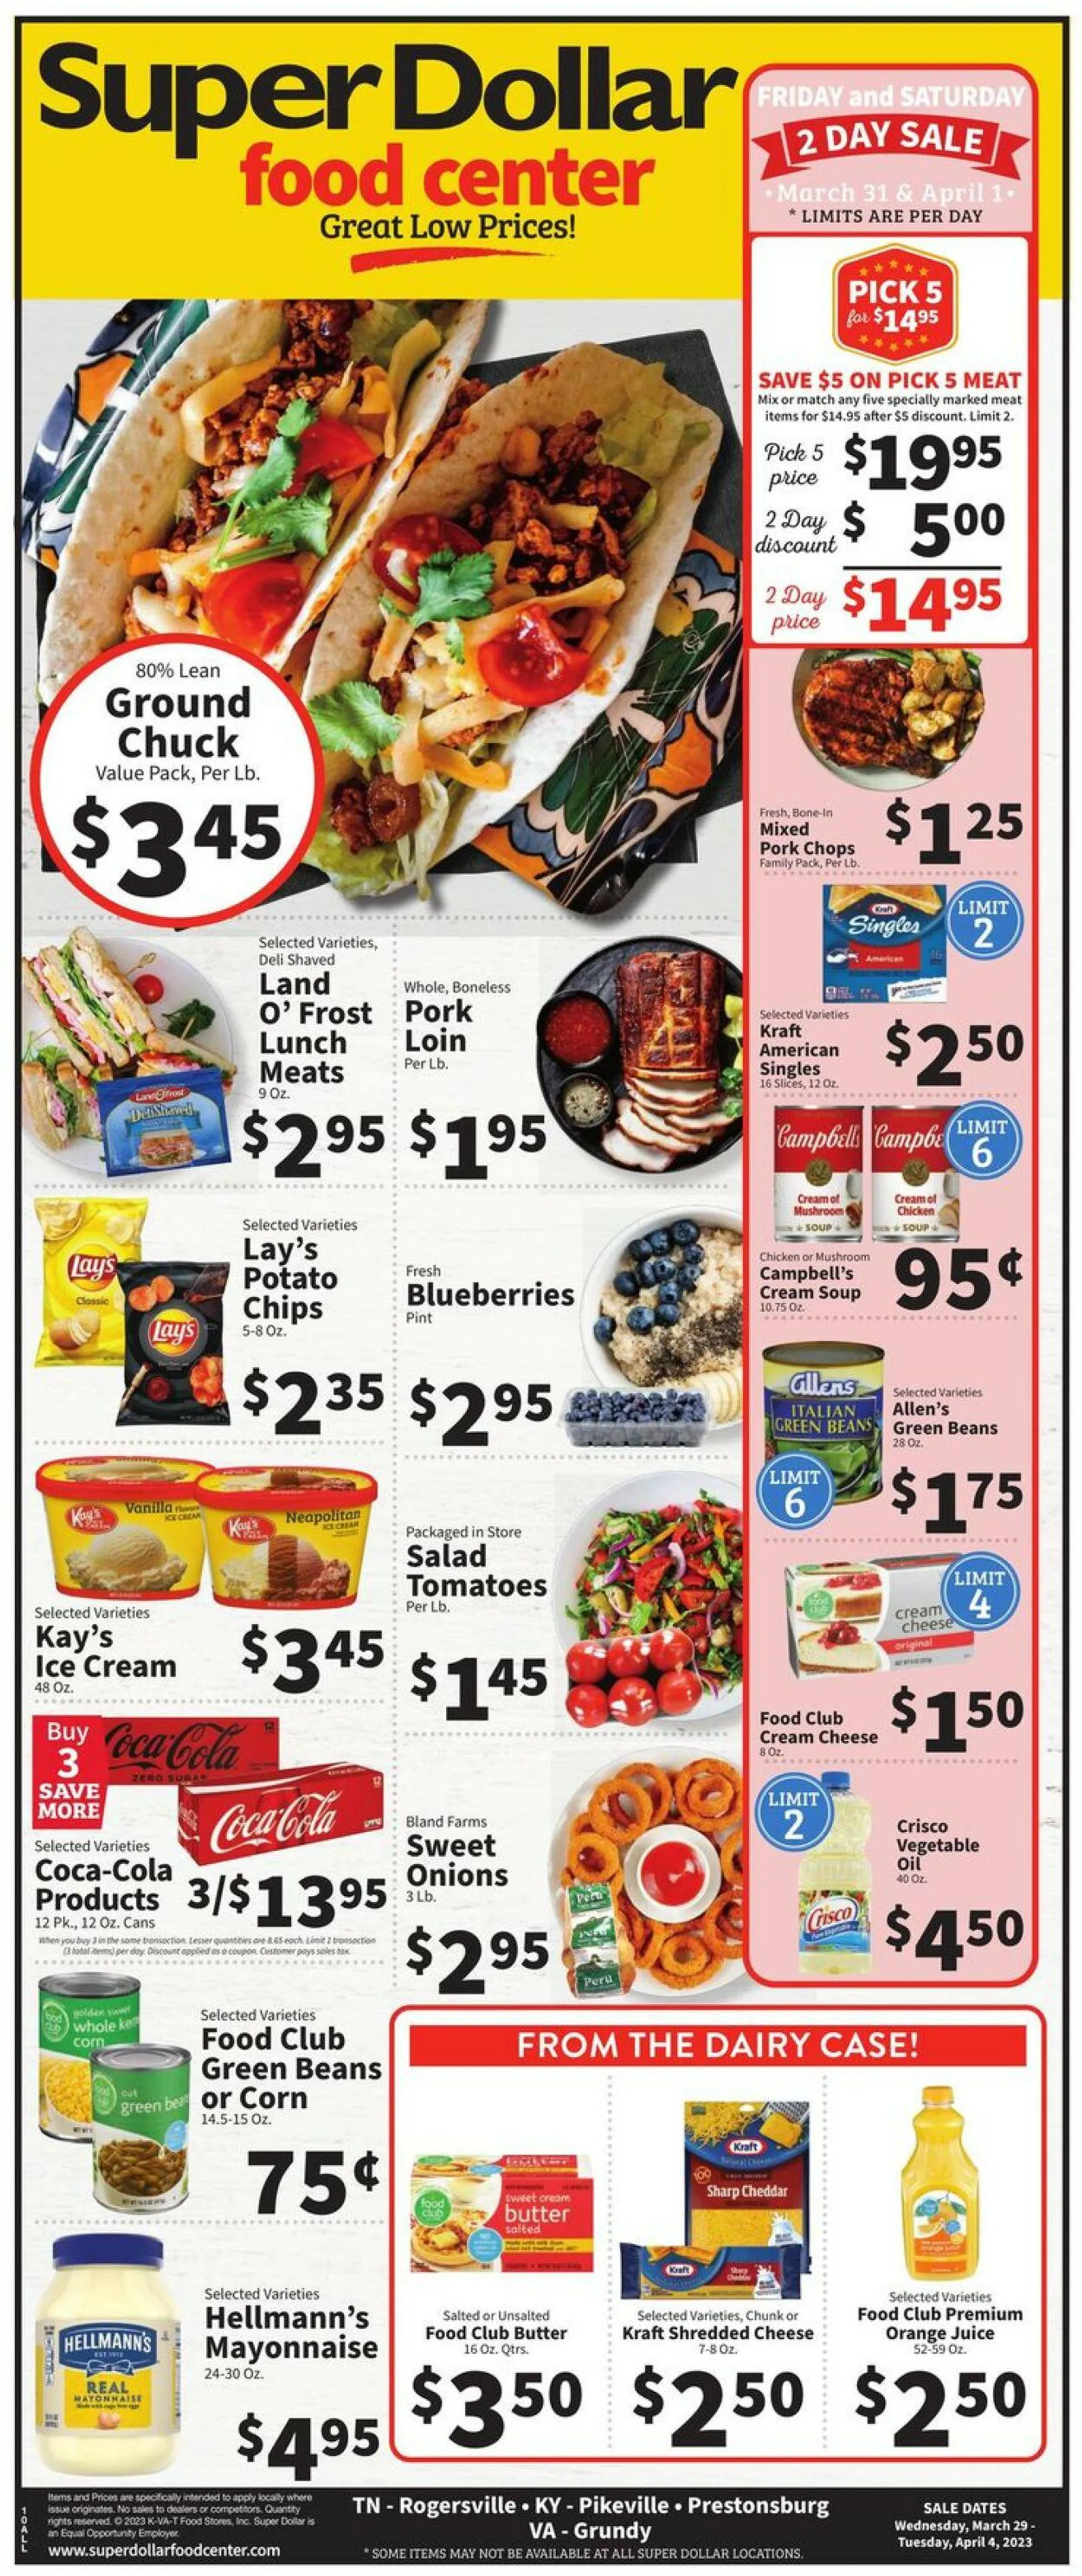 Super Dollar Food Center Current weekly ad - 1